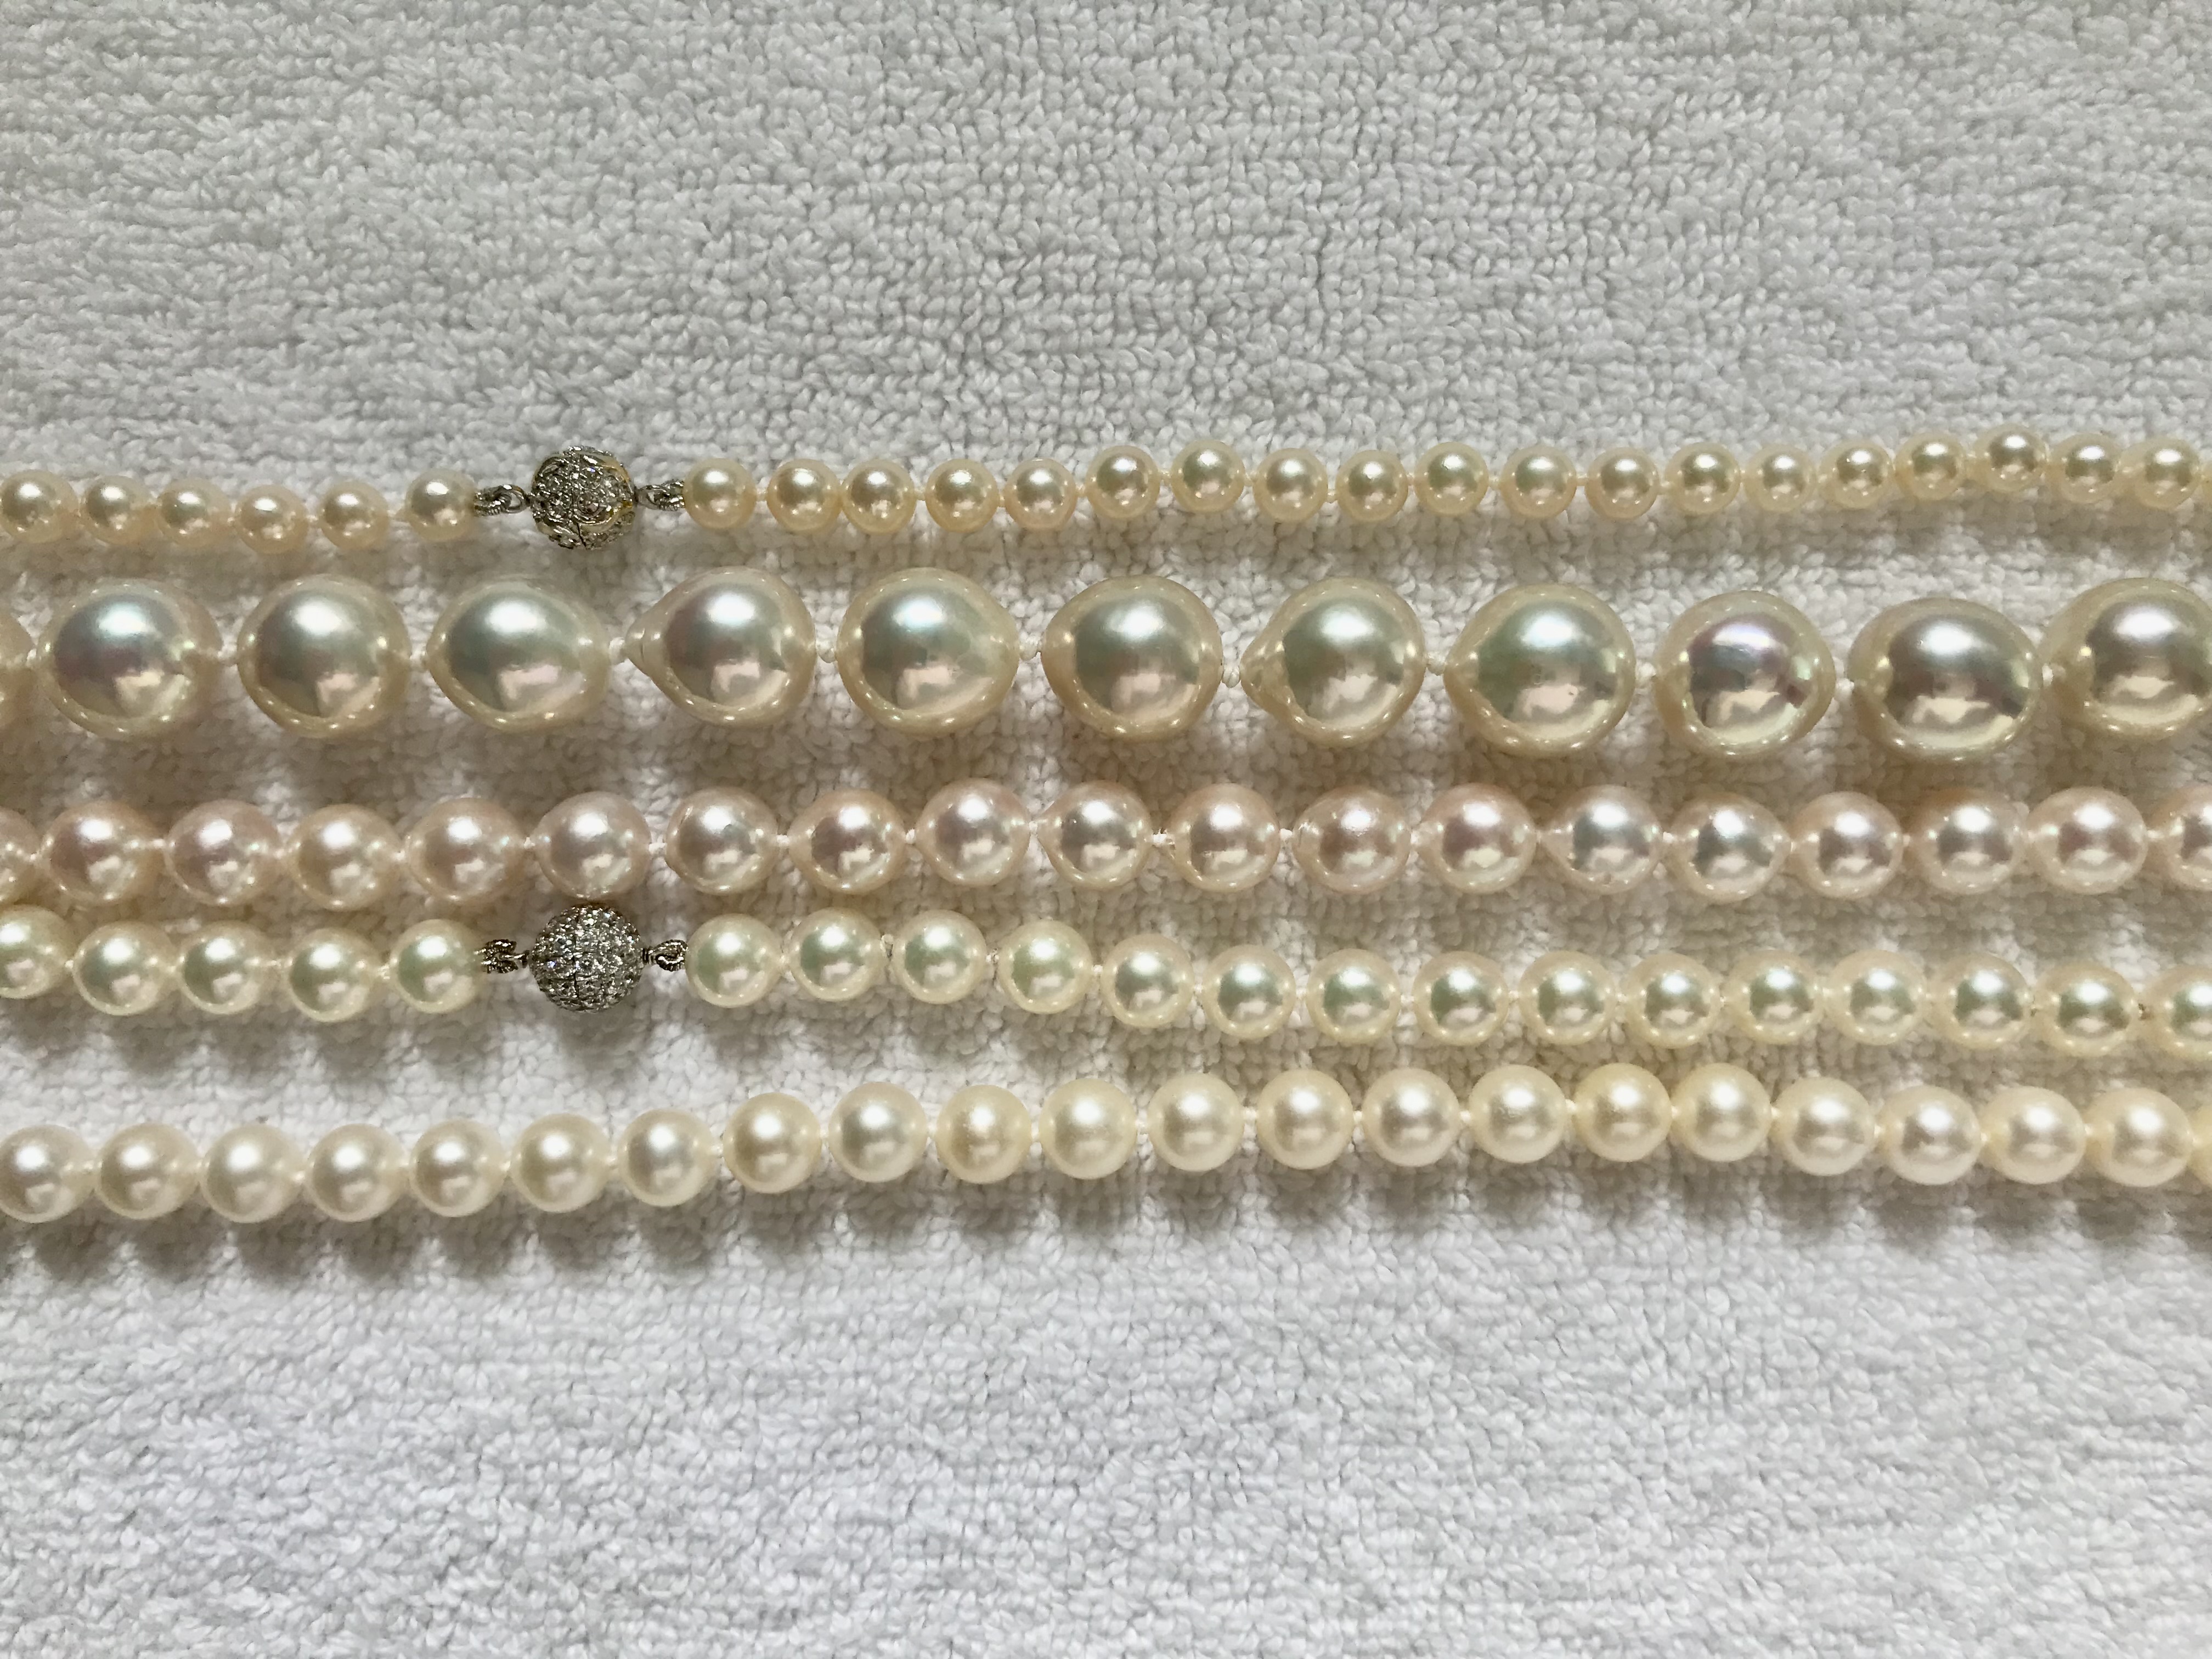 Top: First akoya bought in 1982 Second: Big baroque freshwater from Kojima Third: Baroque akoyas from Pearl Paradise Fourth: Natural white Hanadama rope from Pearl Paradise Fifth: Freshadamas from Pearl Paradise 2